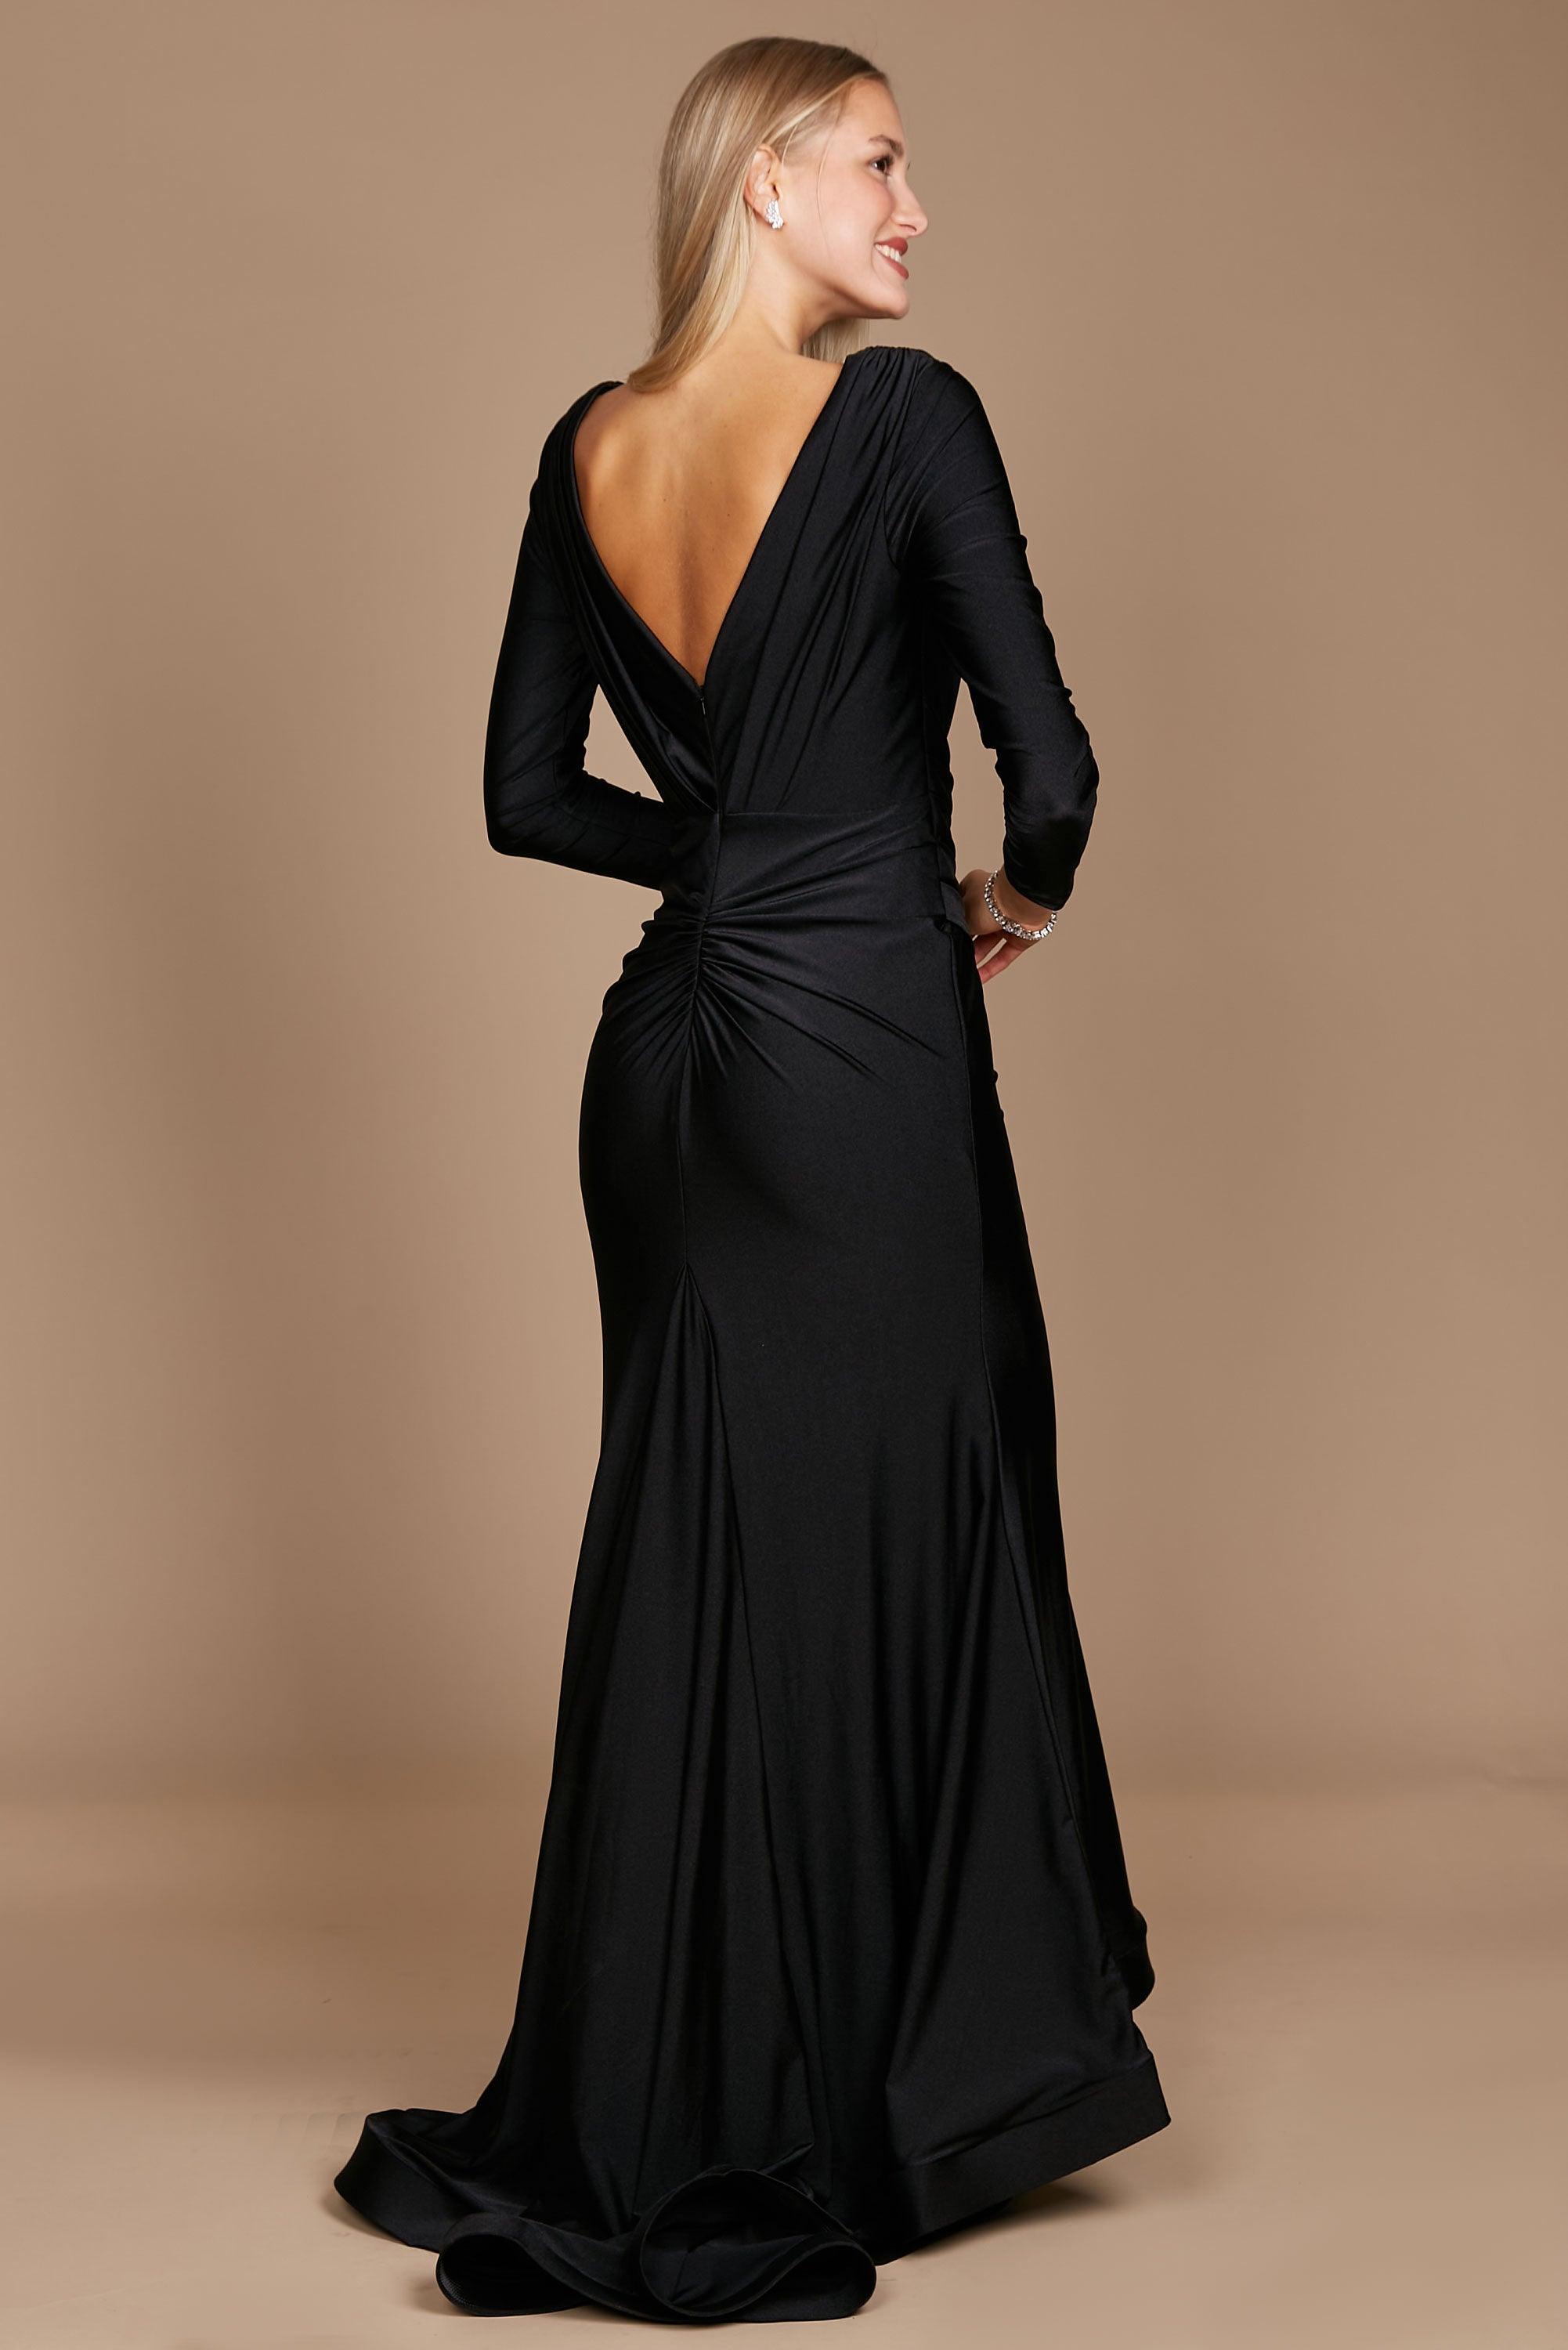 Cristallini Sheer Long Sleeve Beaded Evening Gown - District 5 Boutique